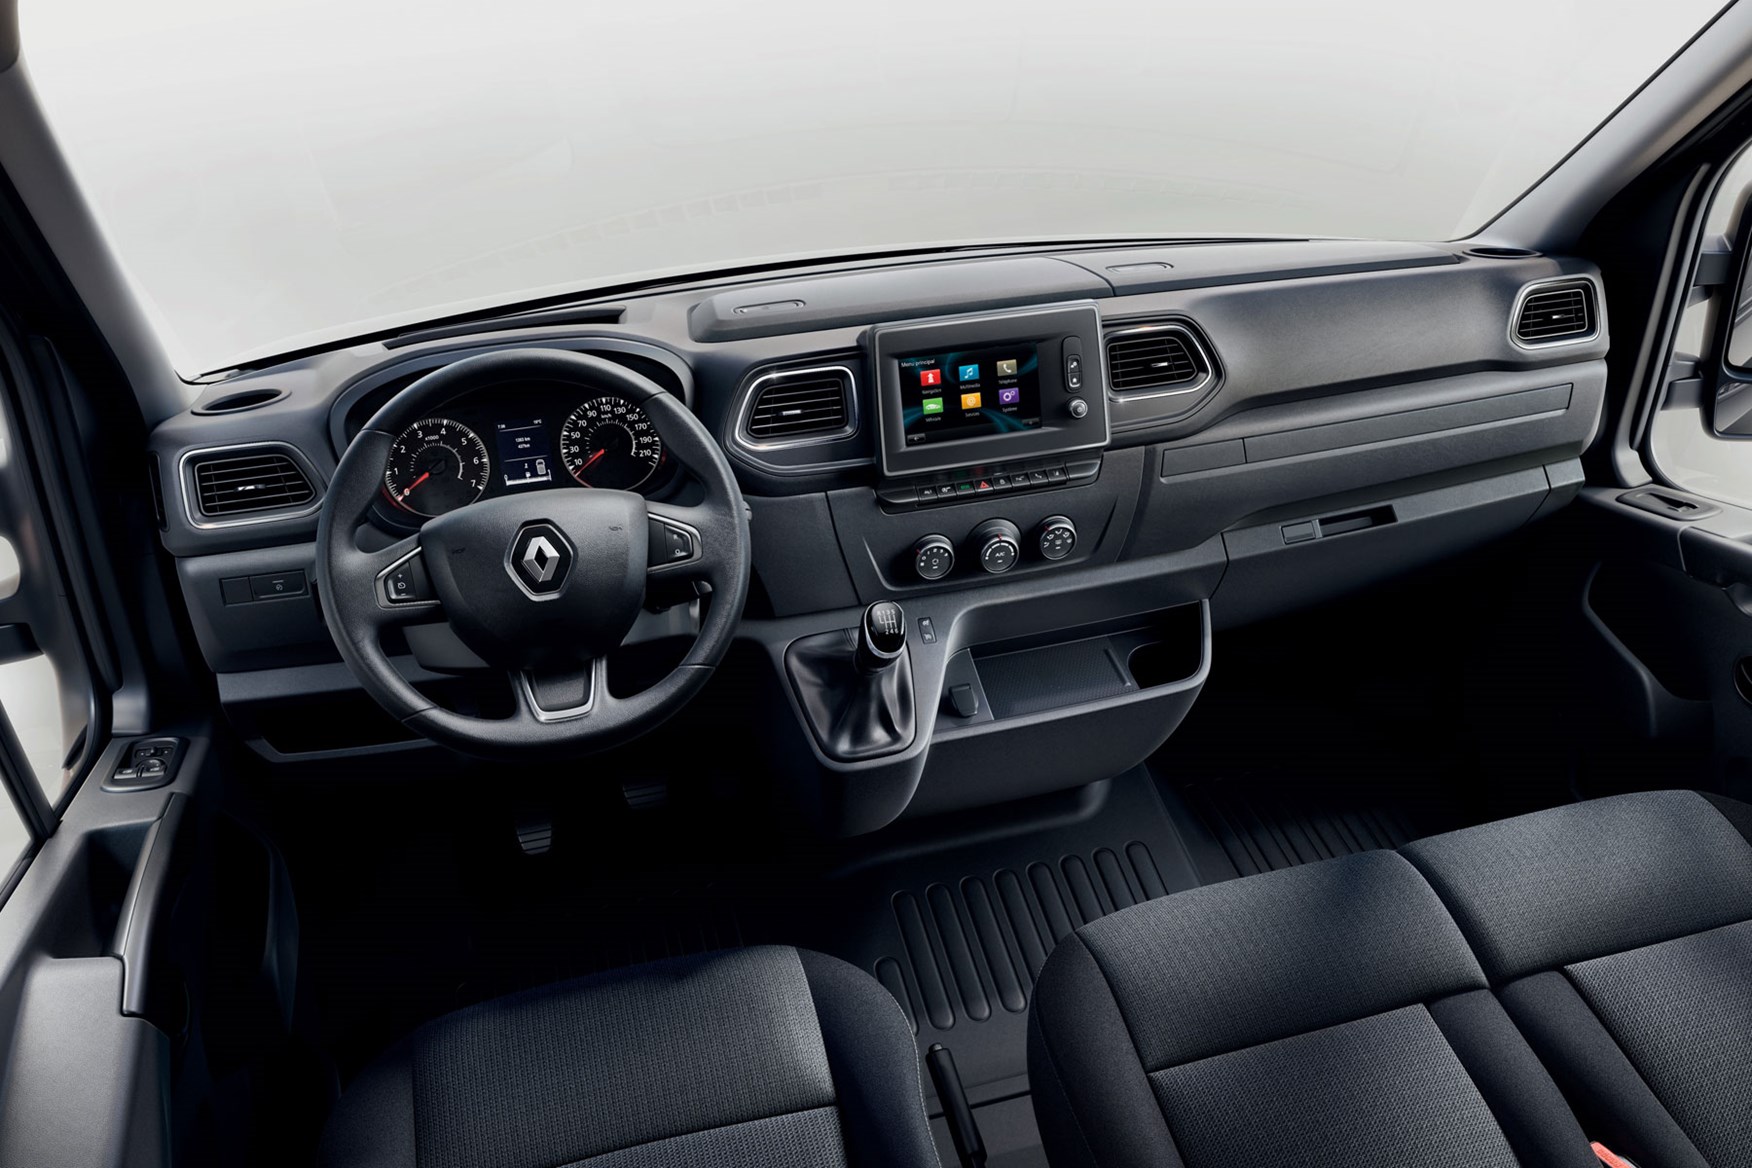 Most renault kangoo models with this range of mileage are from 2008. 2019 Renault Master facelift â full details of new-look